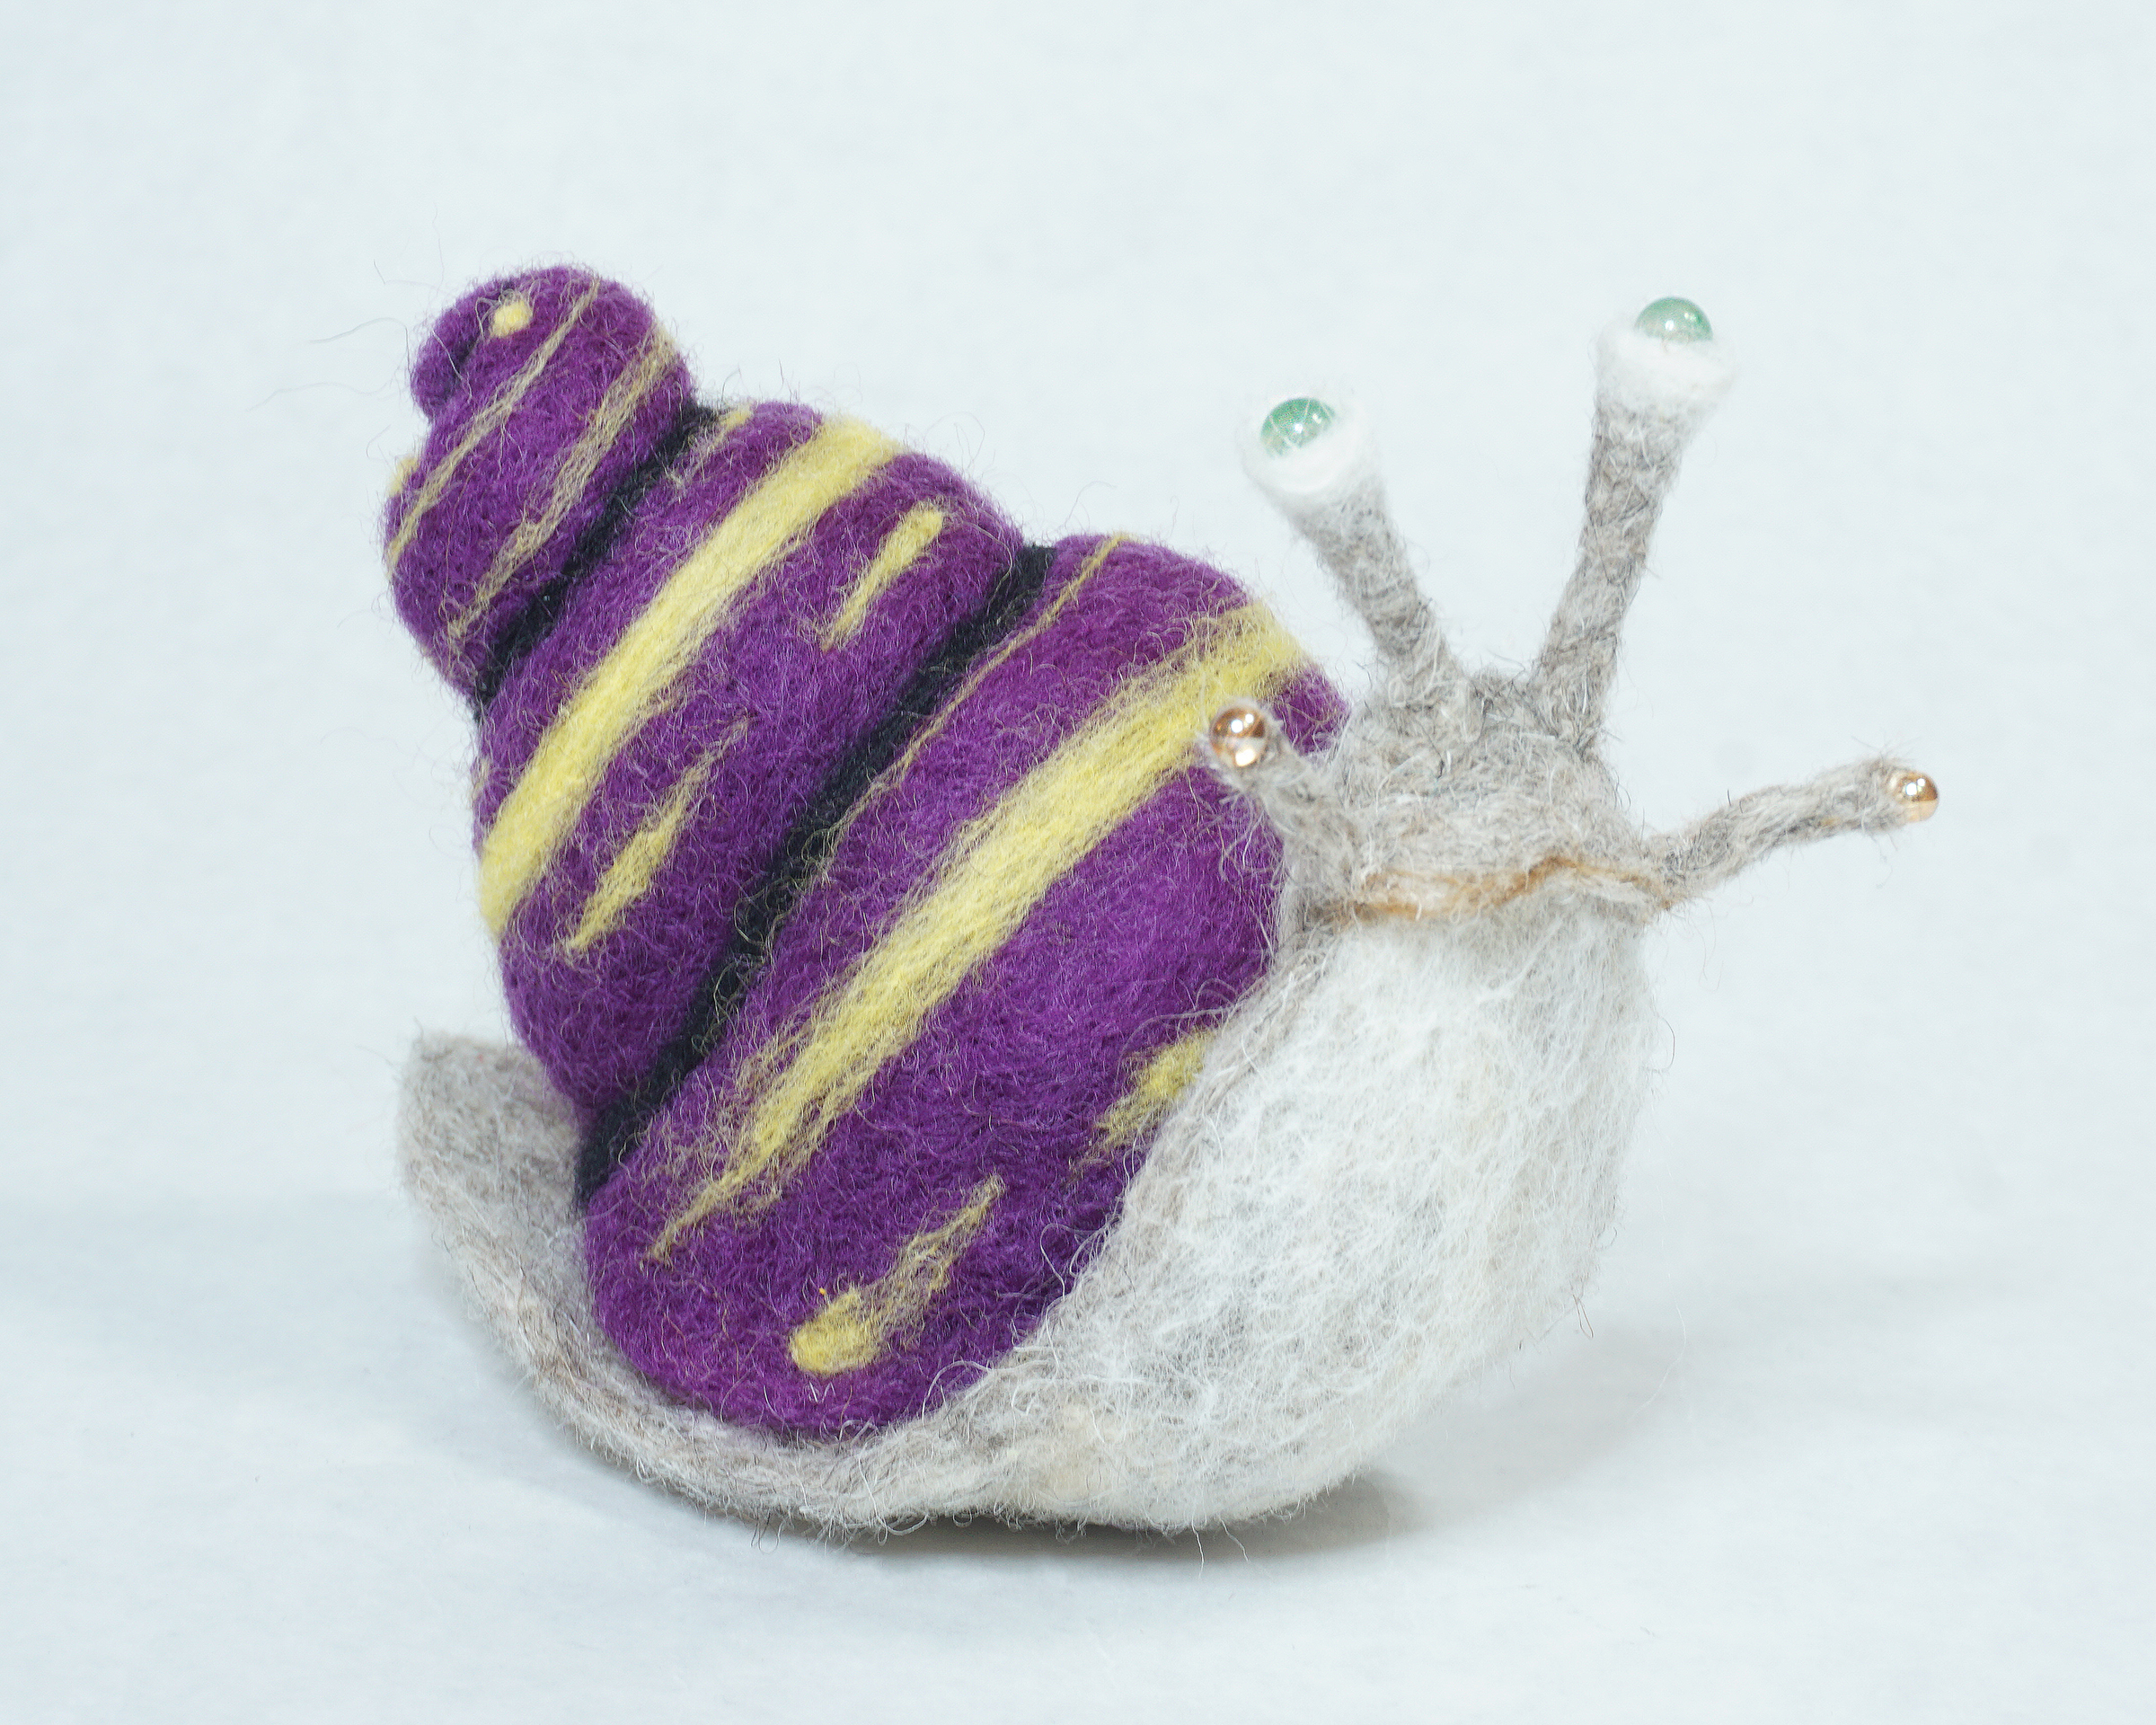 Needle felted snail art doll figure sculpture based on imagery pulled from Virginia Wolfe short story Kew Gardens